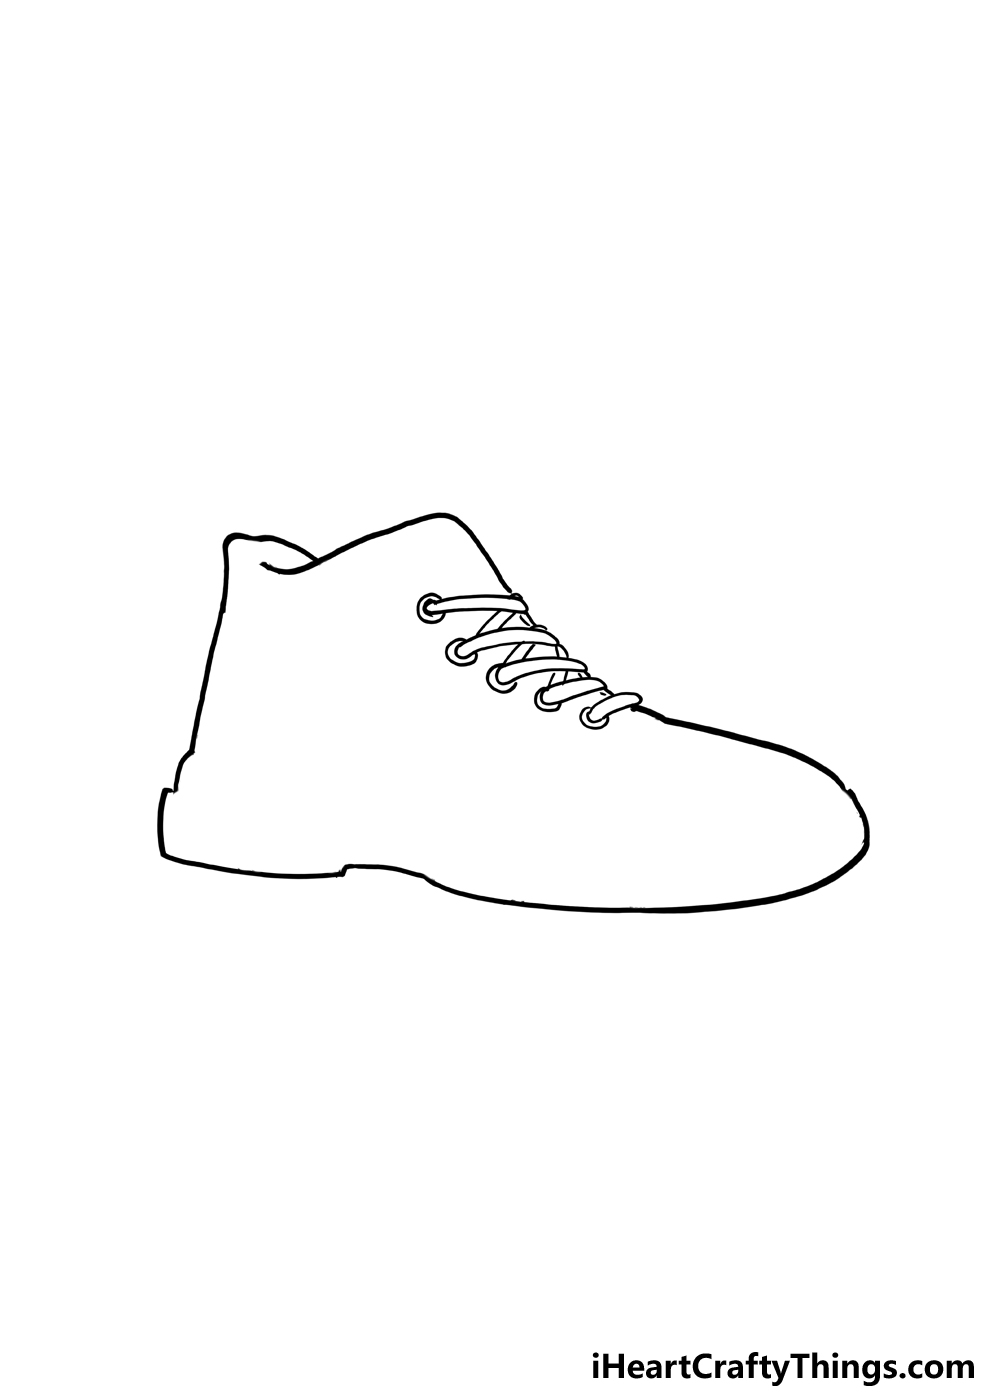 How to Draw A Shoe step 4